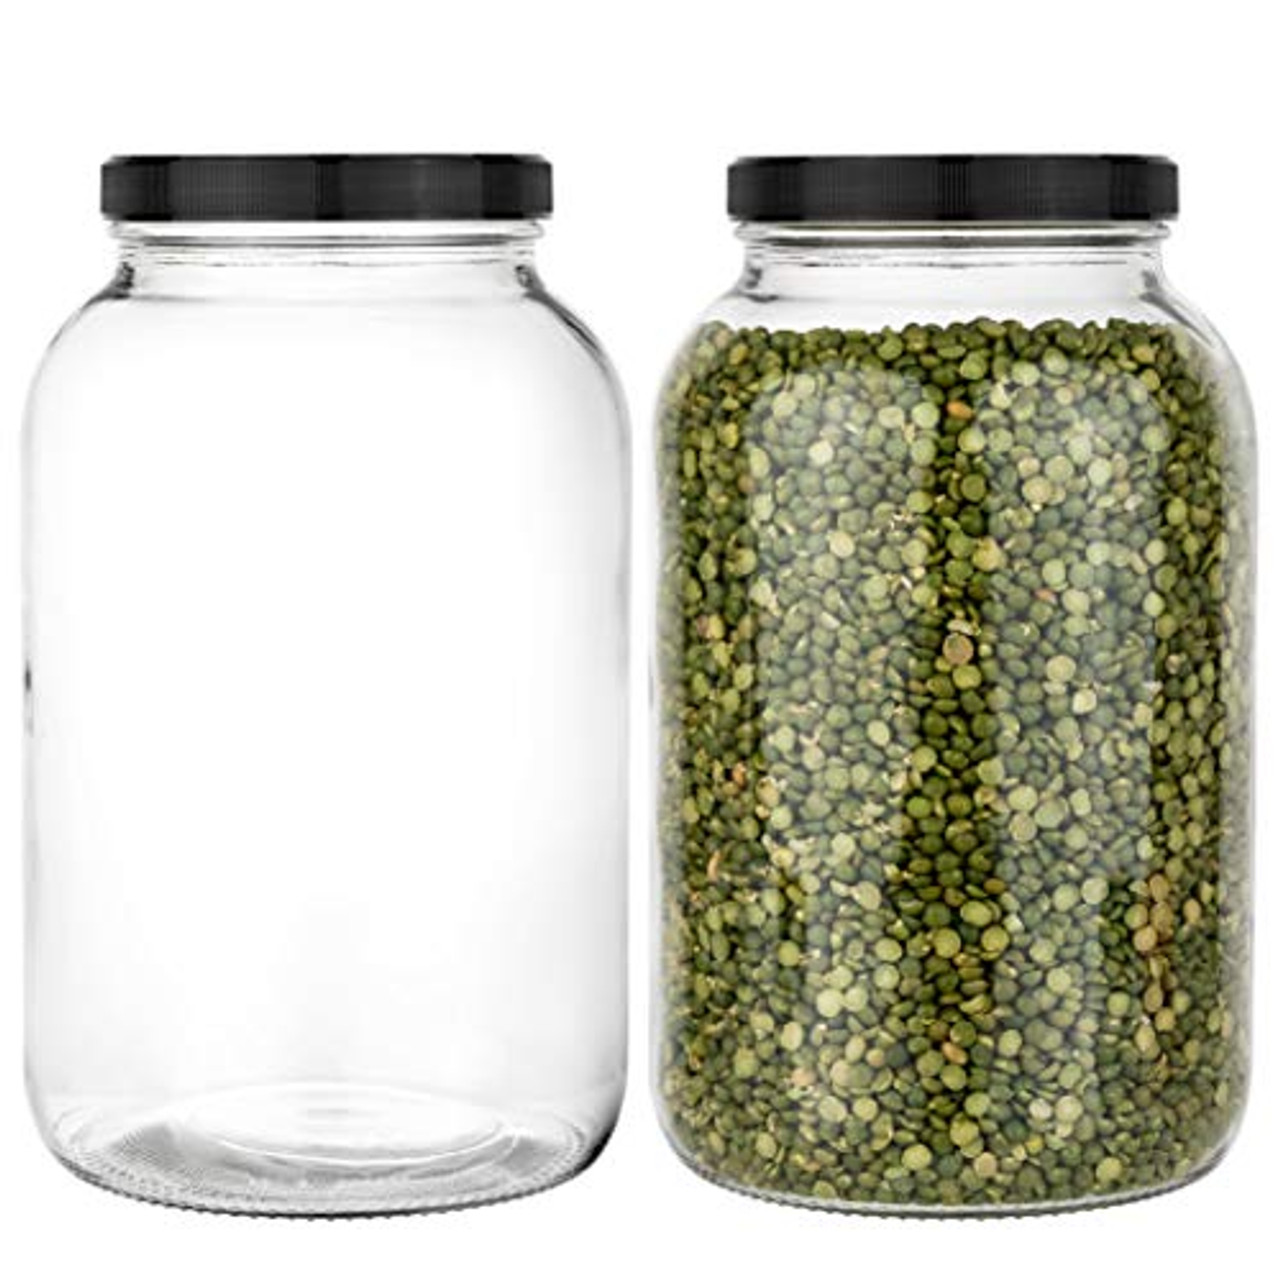 1-Gallon Clear Glass Large Jar Wide Mouth w/Airtight Metal Lid For Storing  2Pack